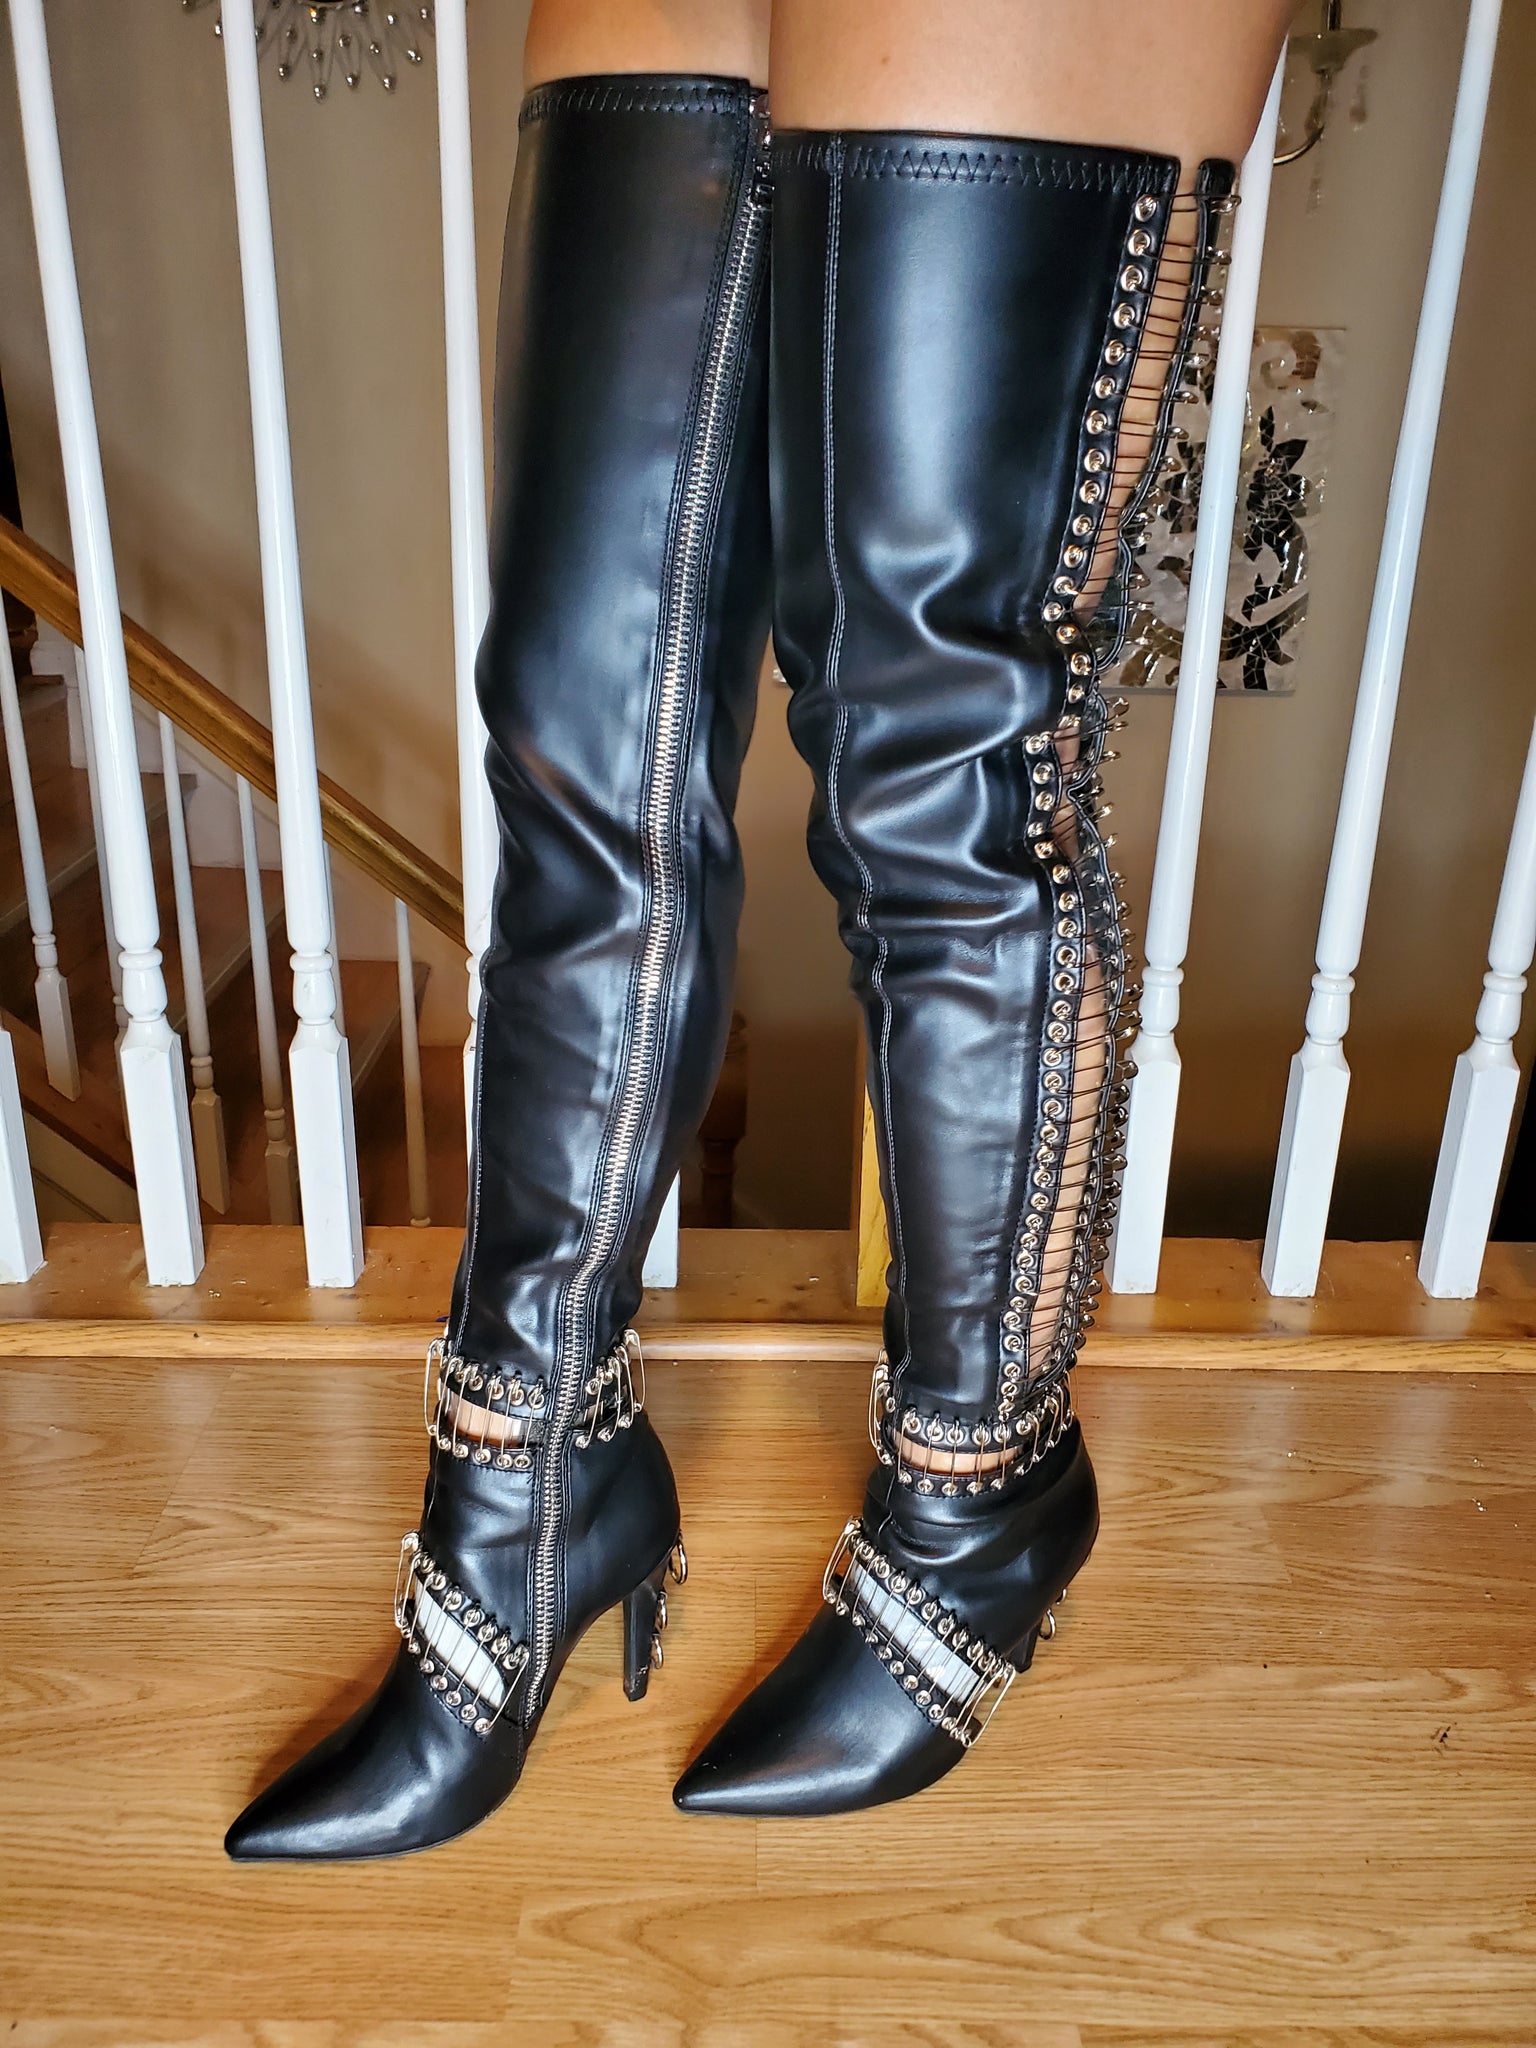 Pin on Thigh high boots